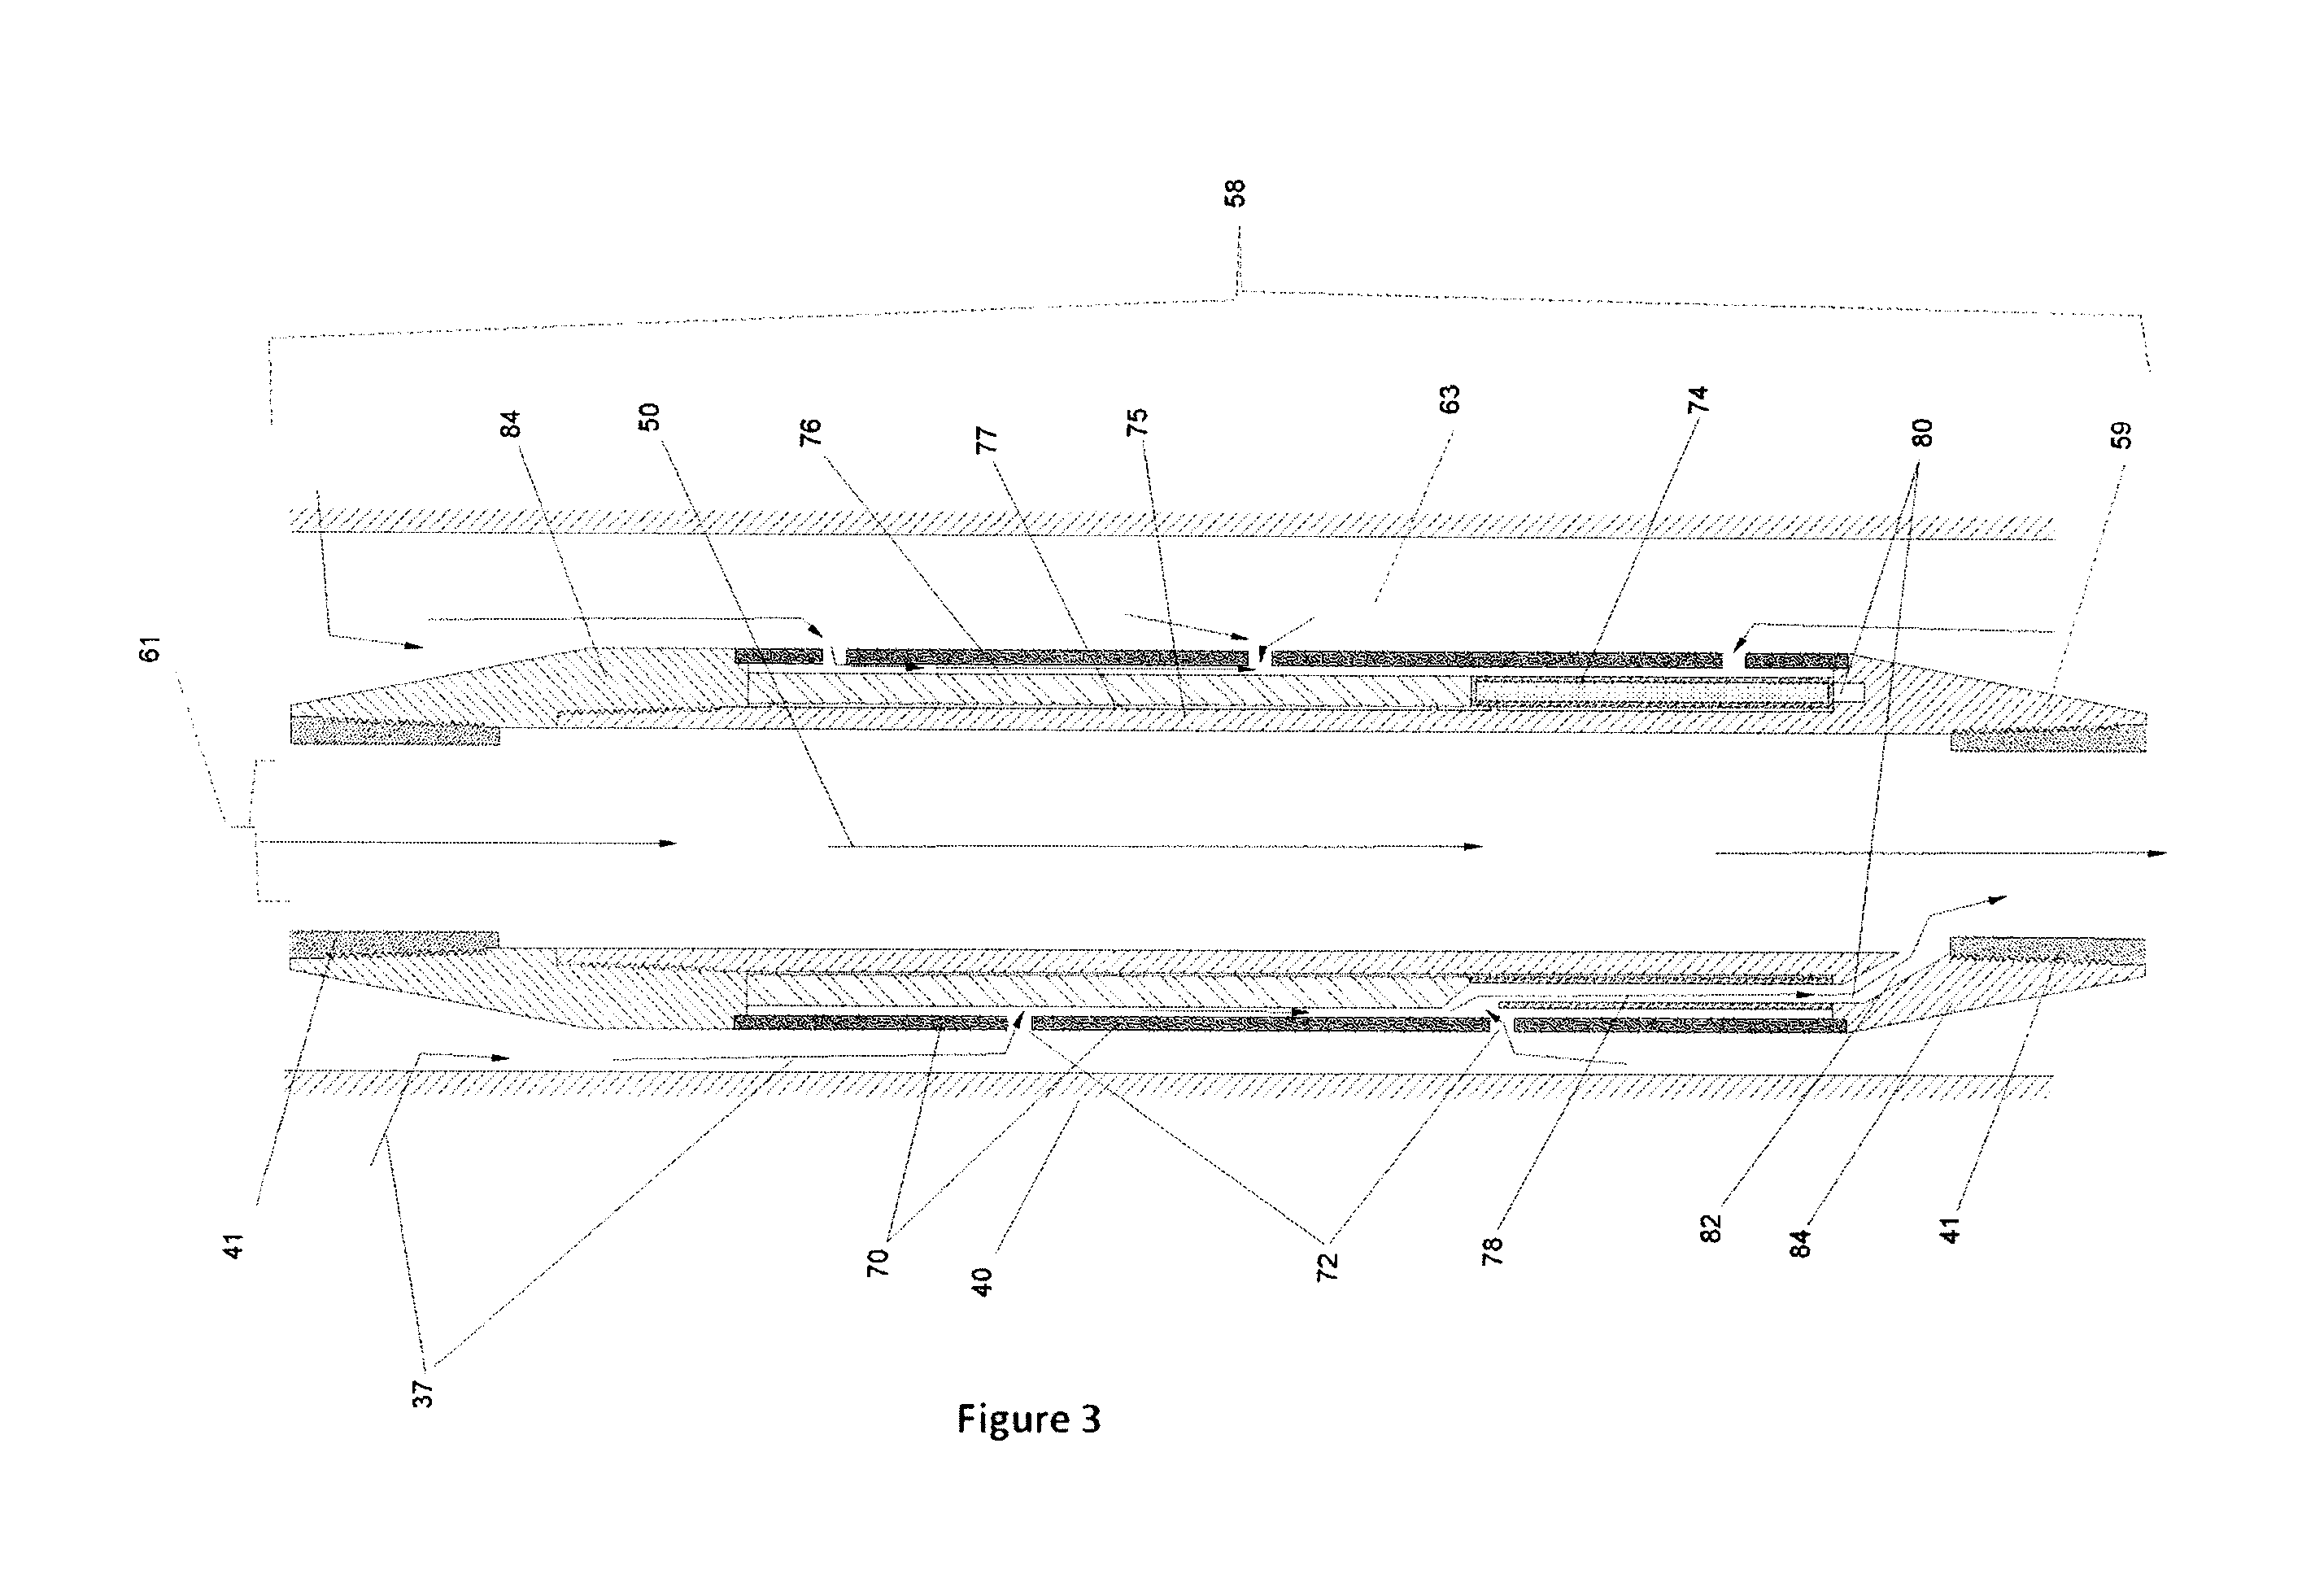 Inflow control valve for controlling the flow of fluids into a generally horizontal production well and method of using the same